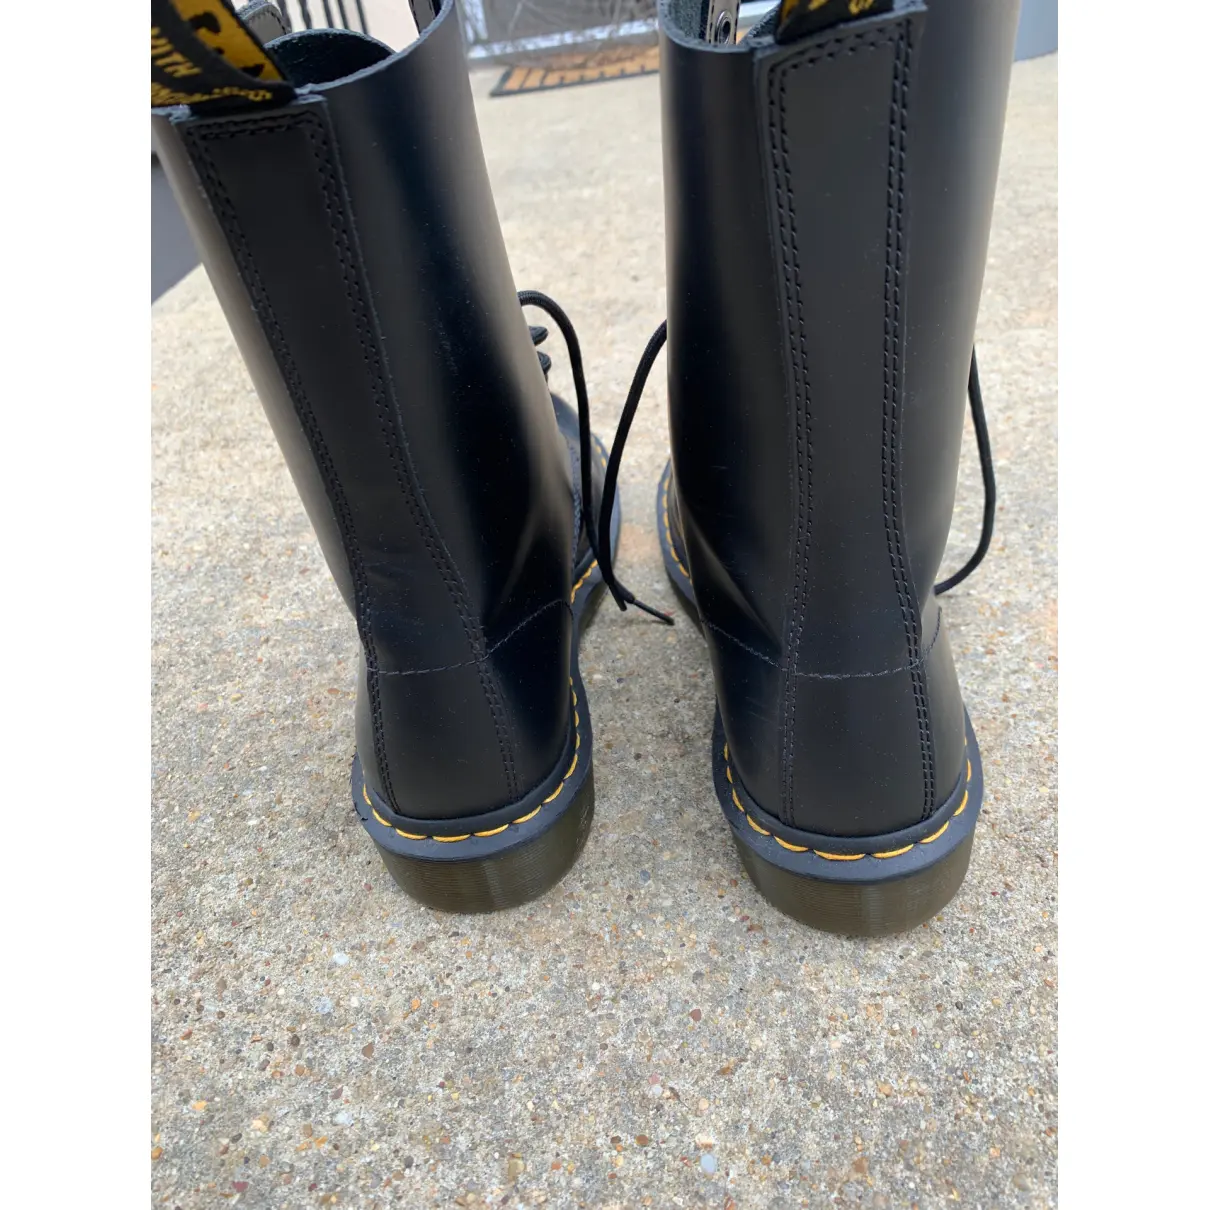 1490 (10 eye) leather boots Dr. Martens